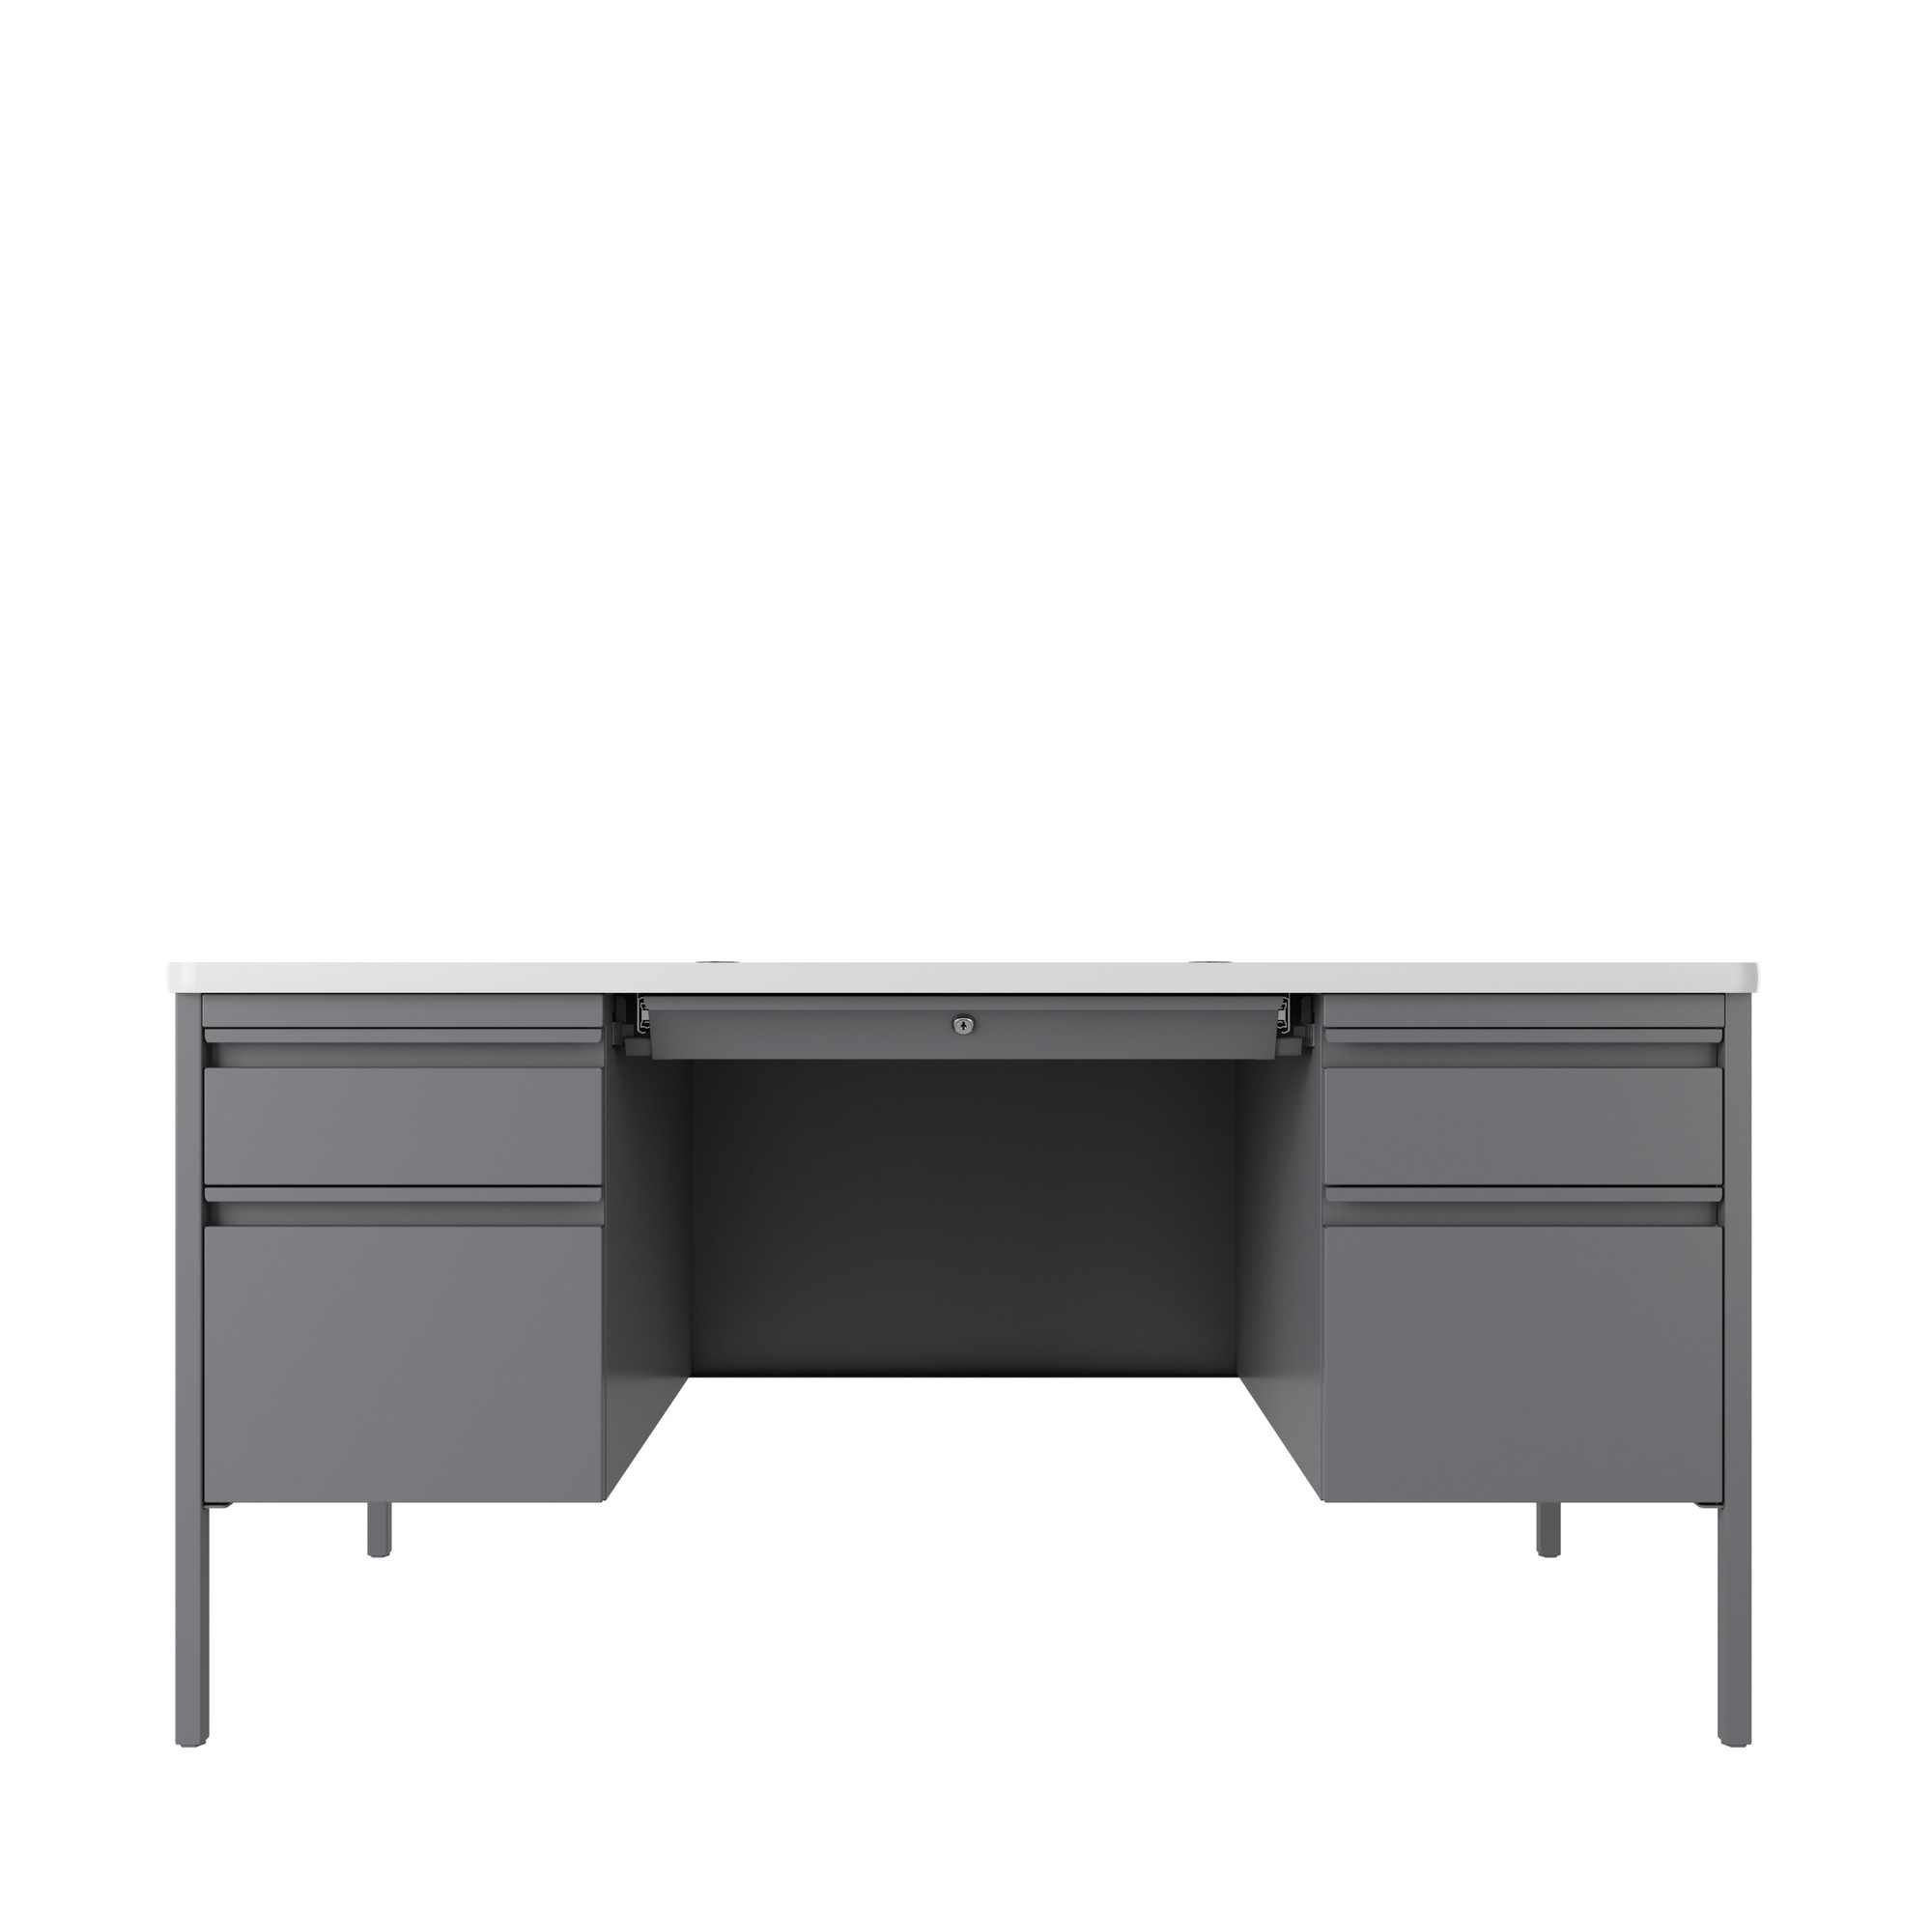 Hirsh Industries, Double Ped File Desk w/ Rounded Corner T-Mold Top, Width 60 in, Height 29.5 in, Depth 30 in, Model 22655